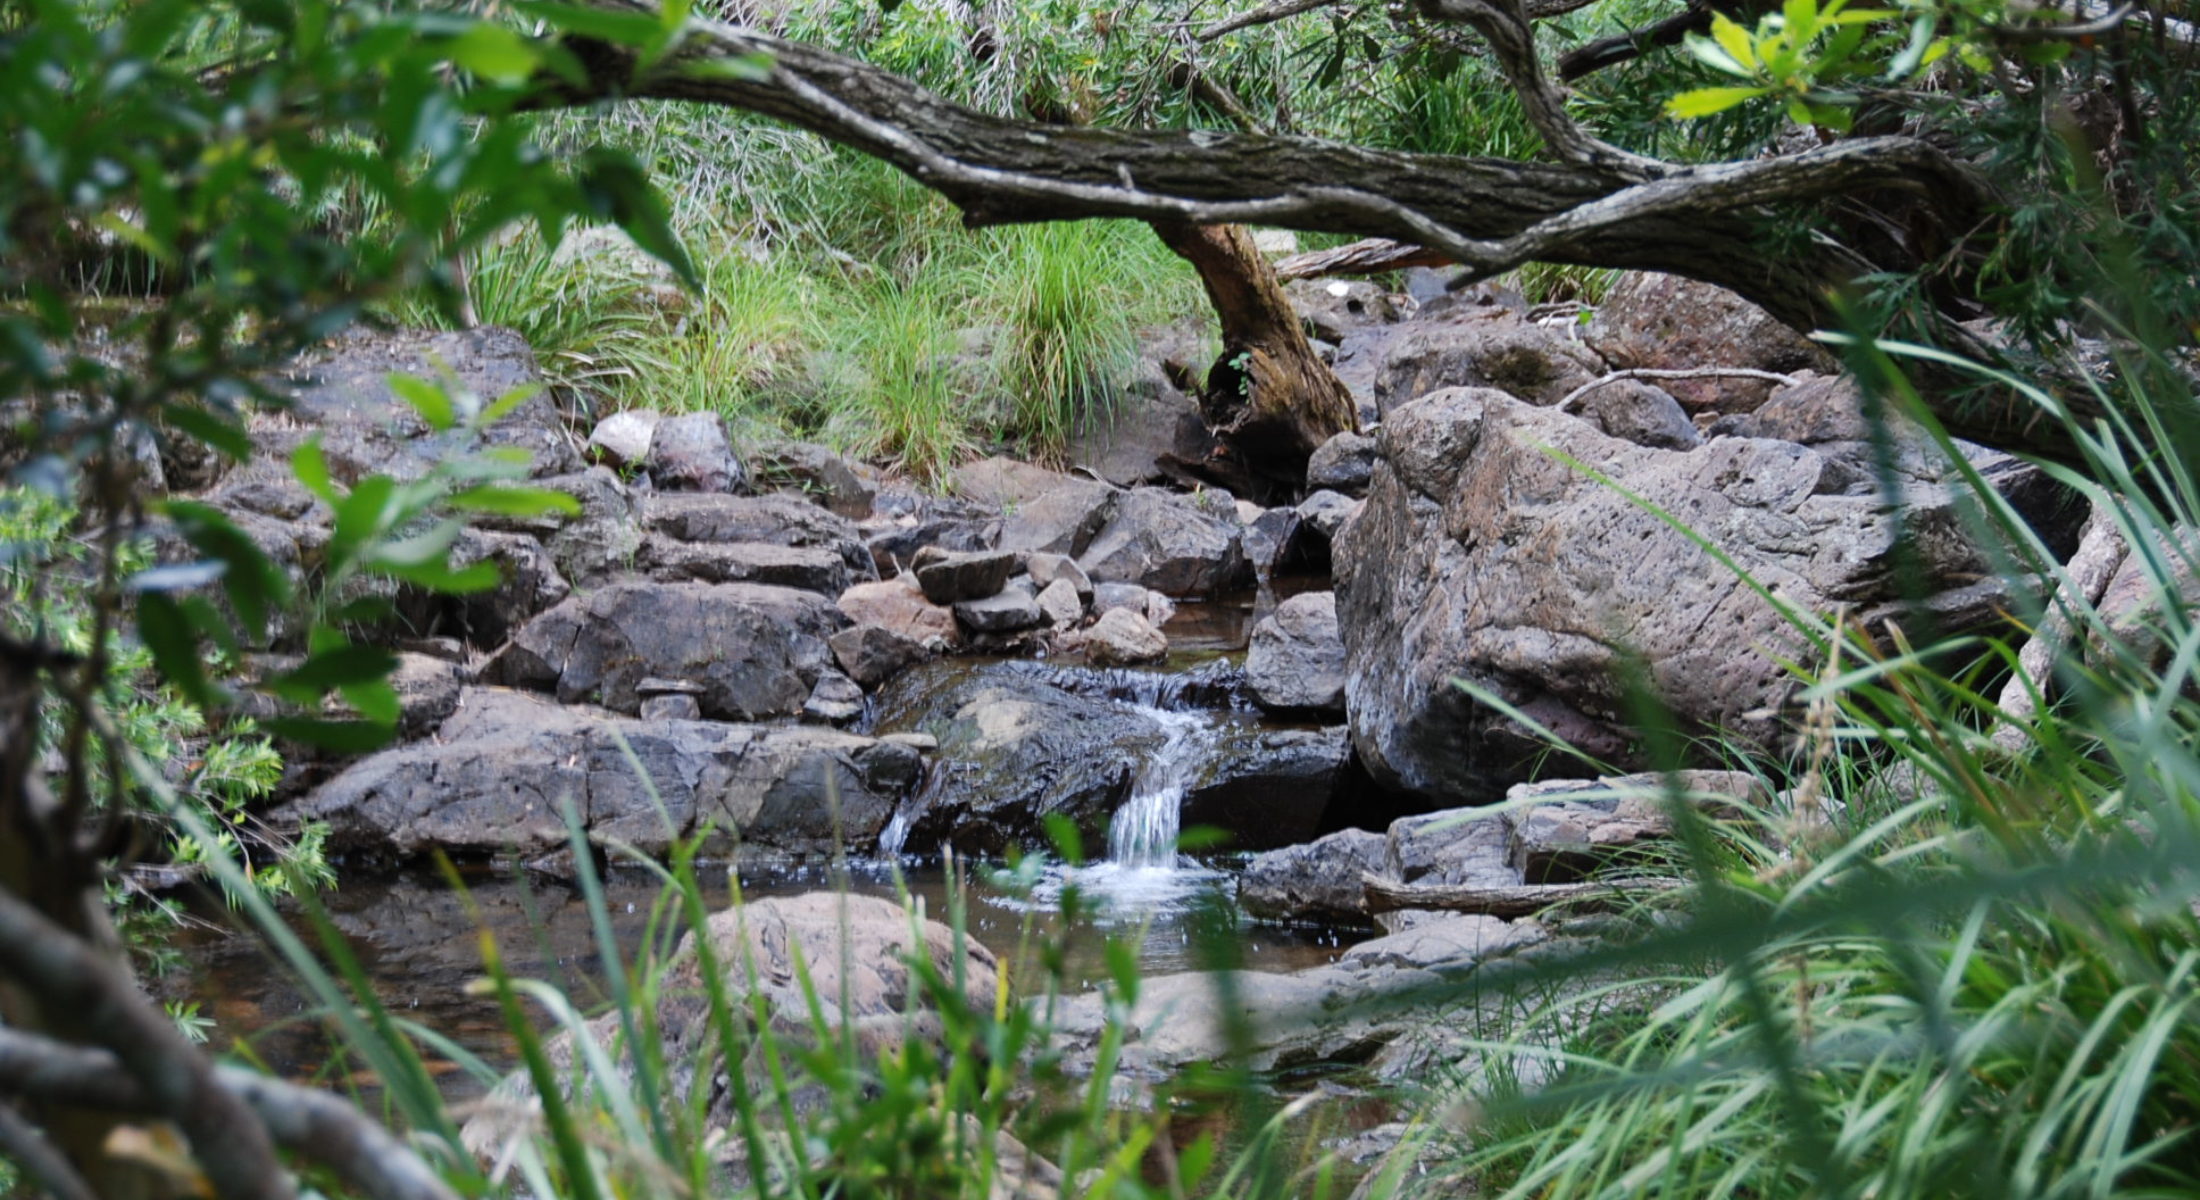 Broadwater In Daguilar National Park At Mount Mee Stream And Rocks